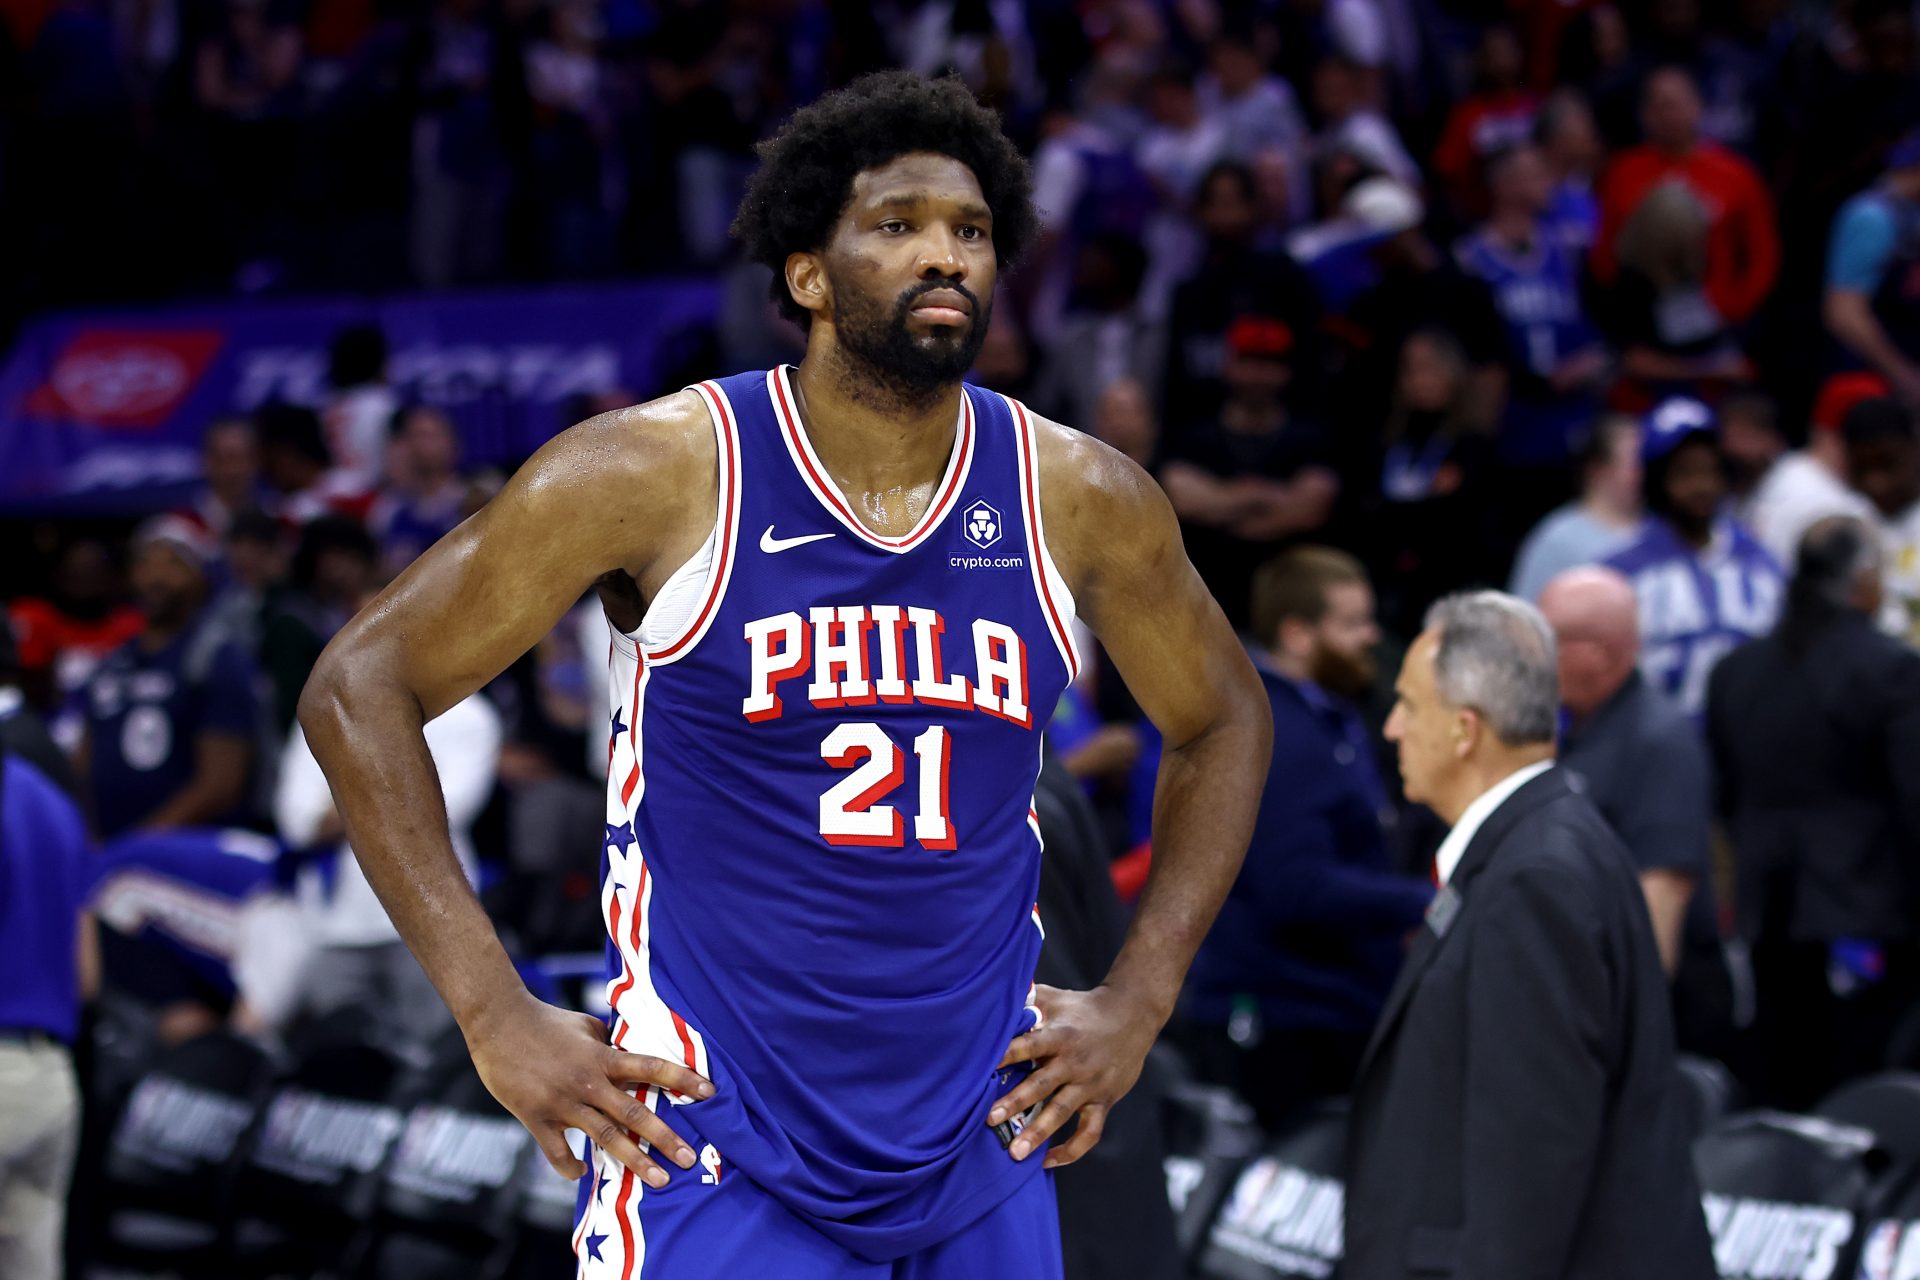 Grade for the 76ers: B-